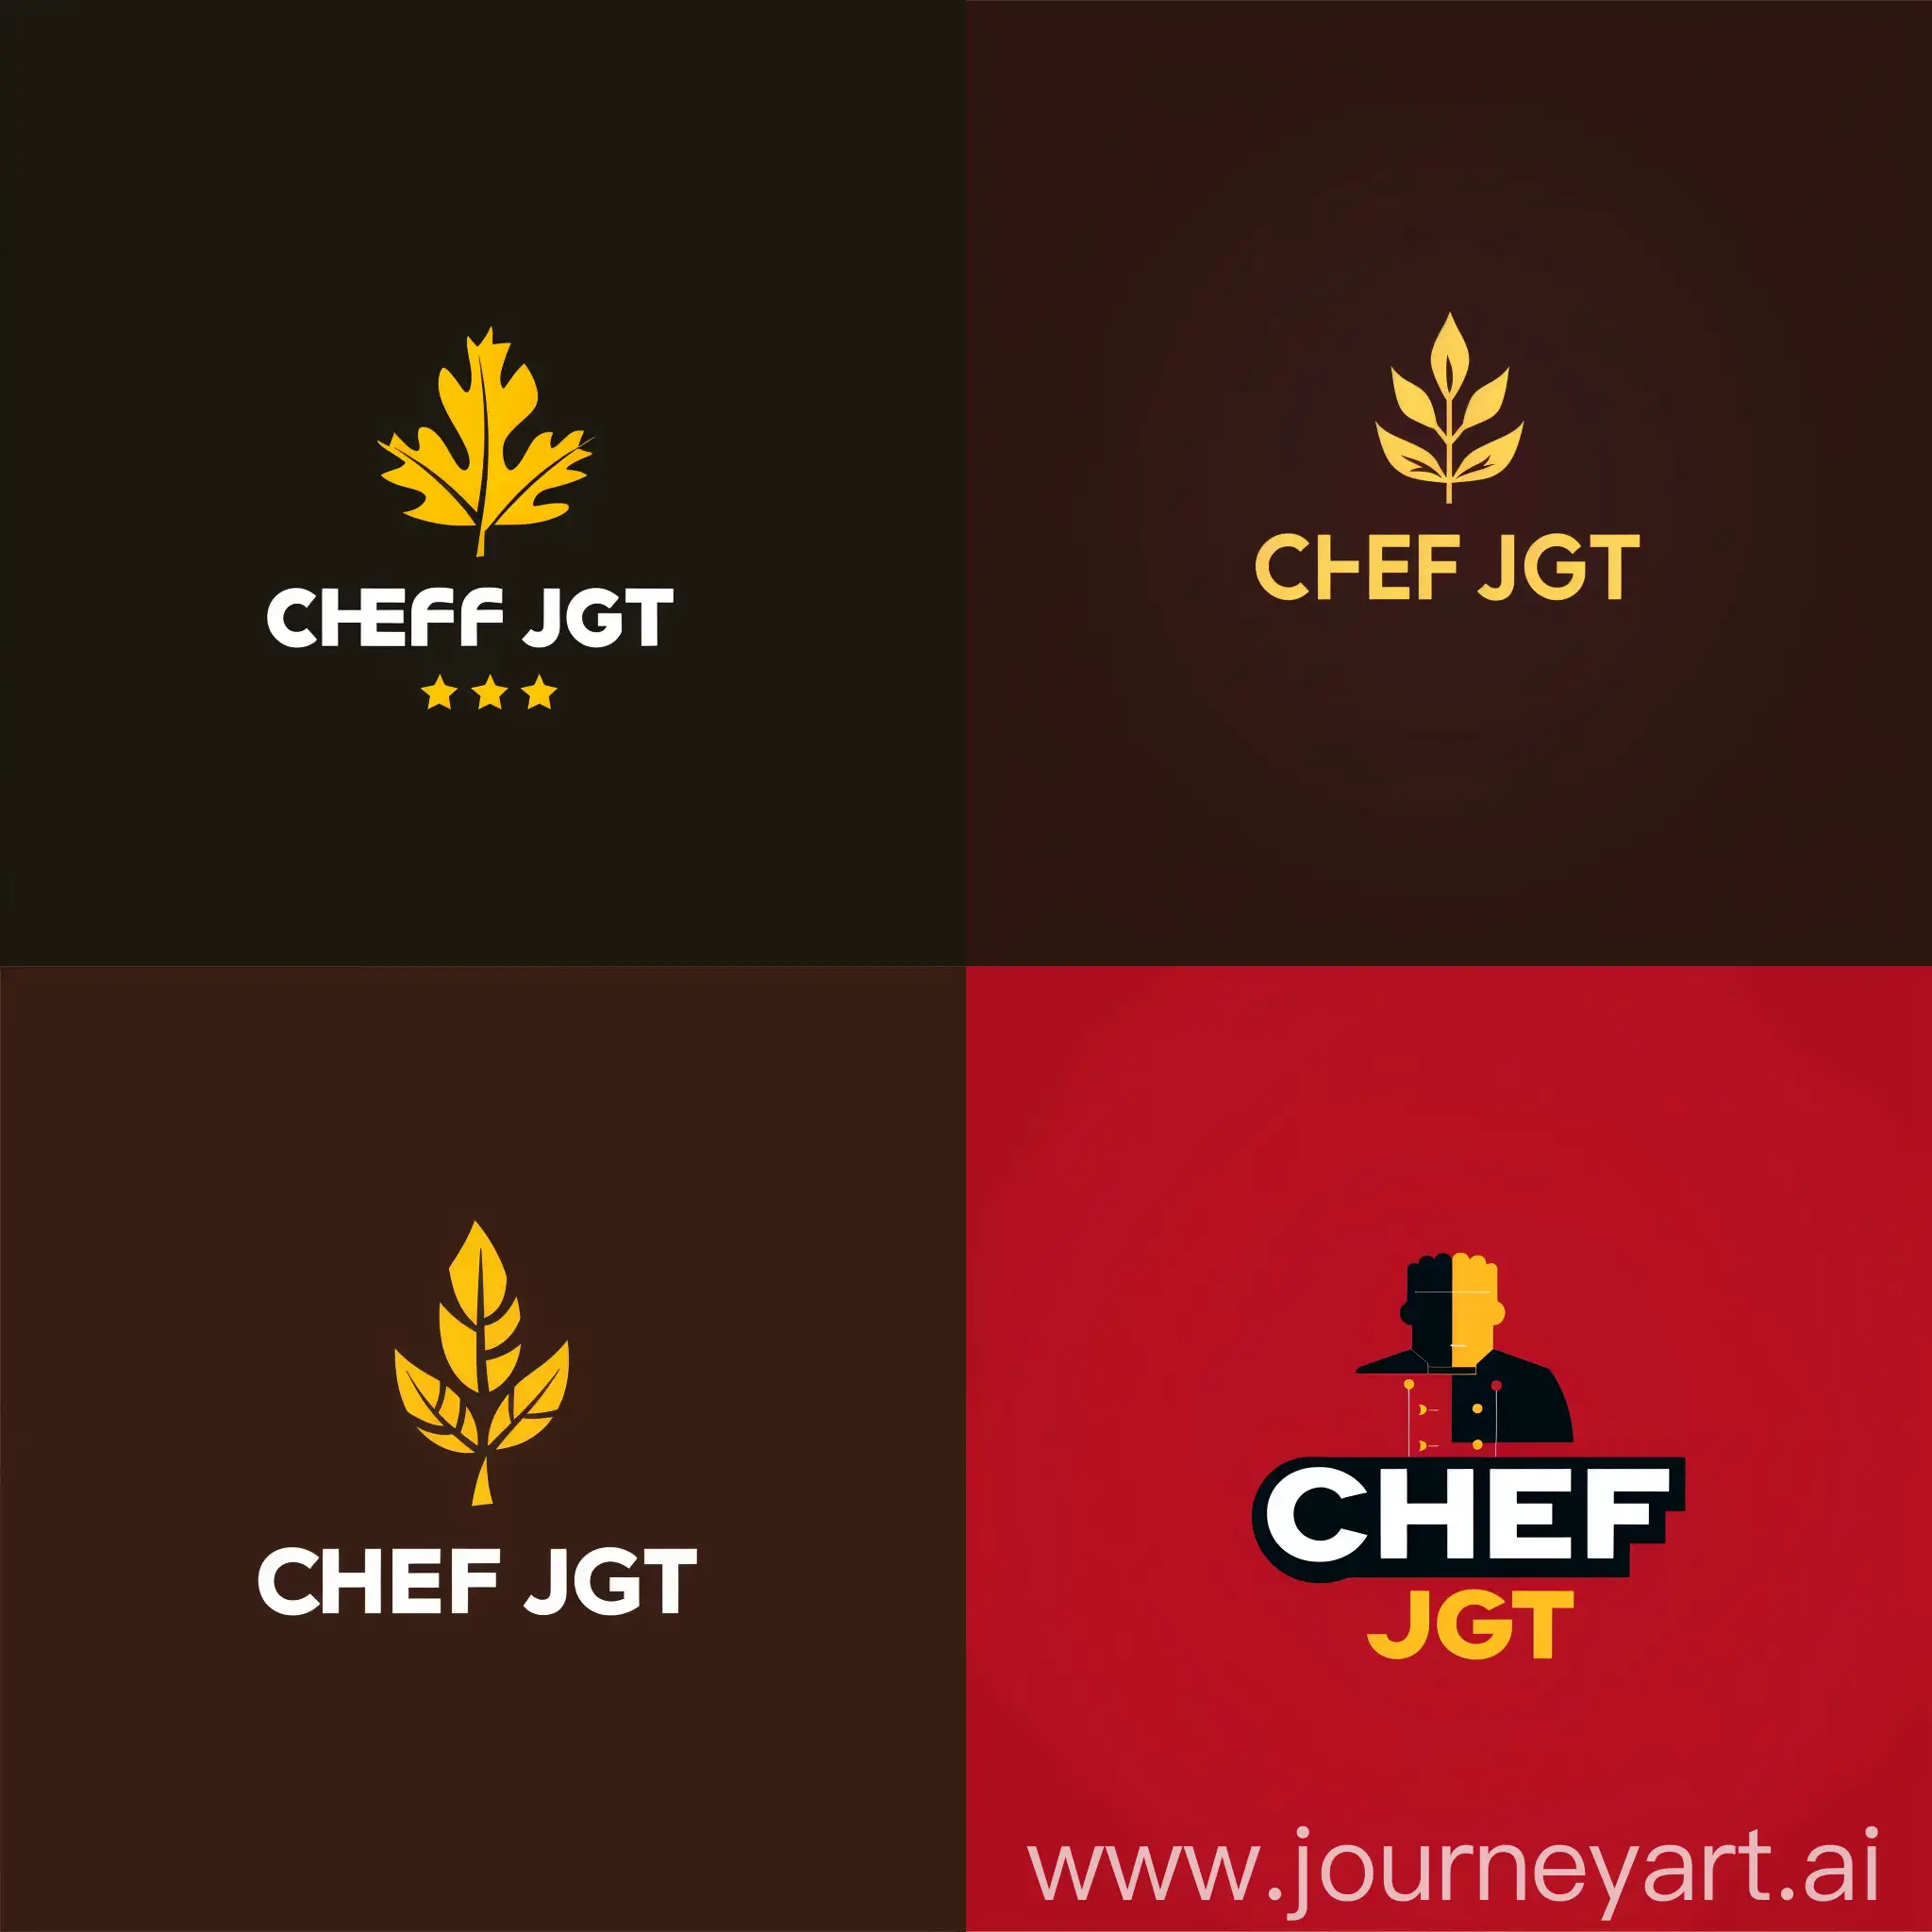 Create a logo for a food brand with name CHEF JGT
